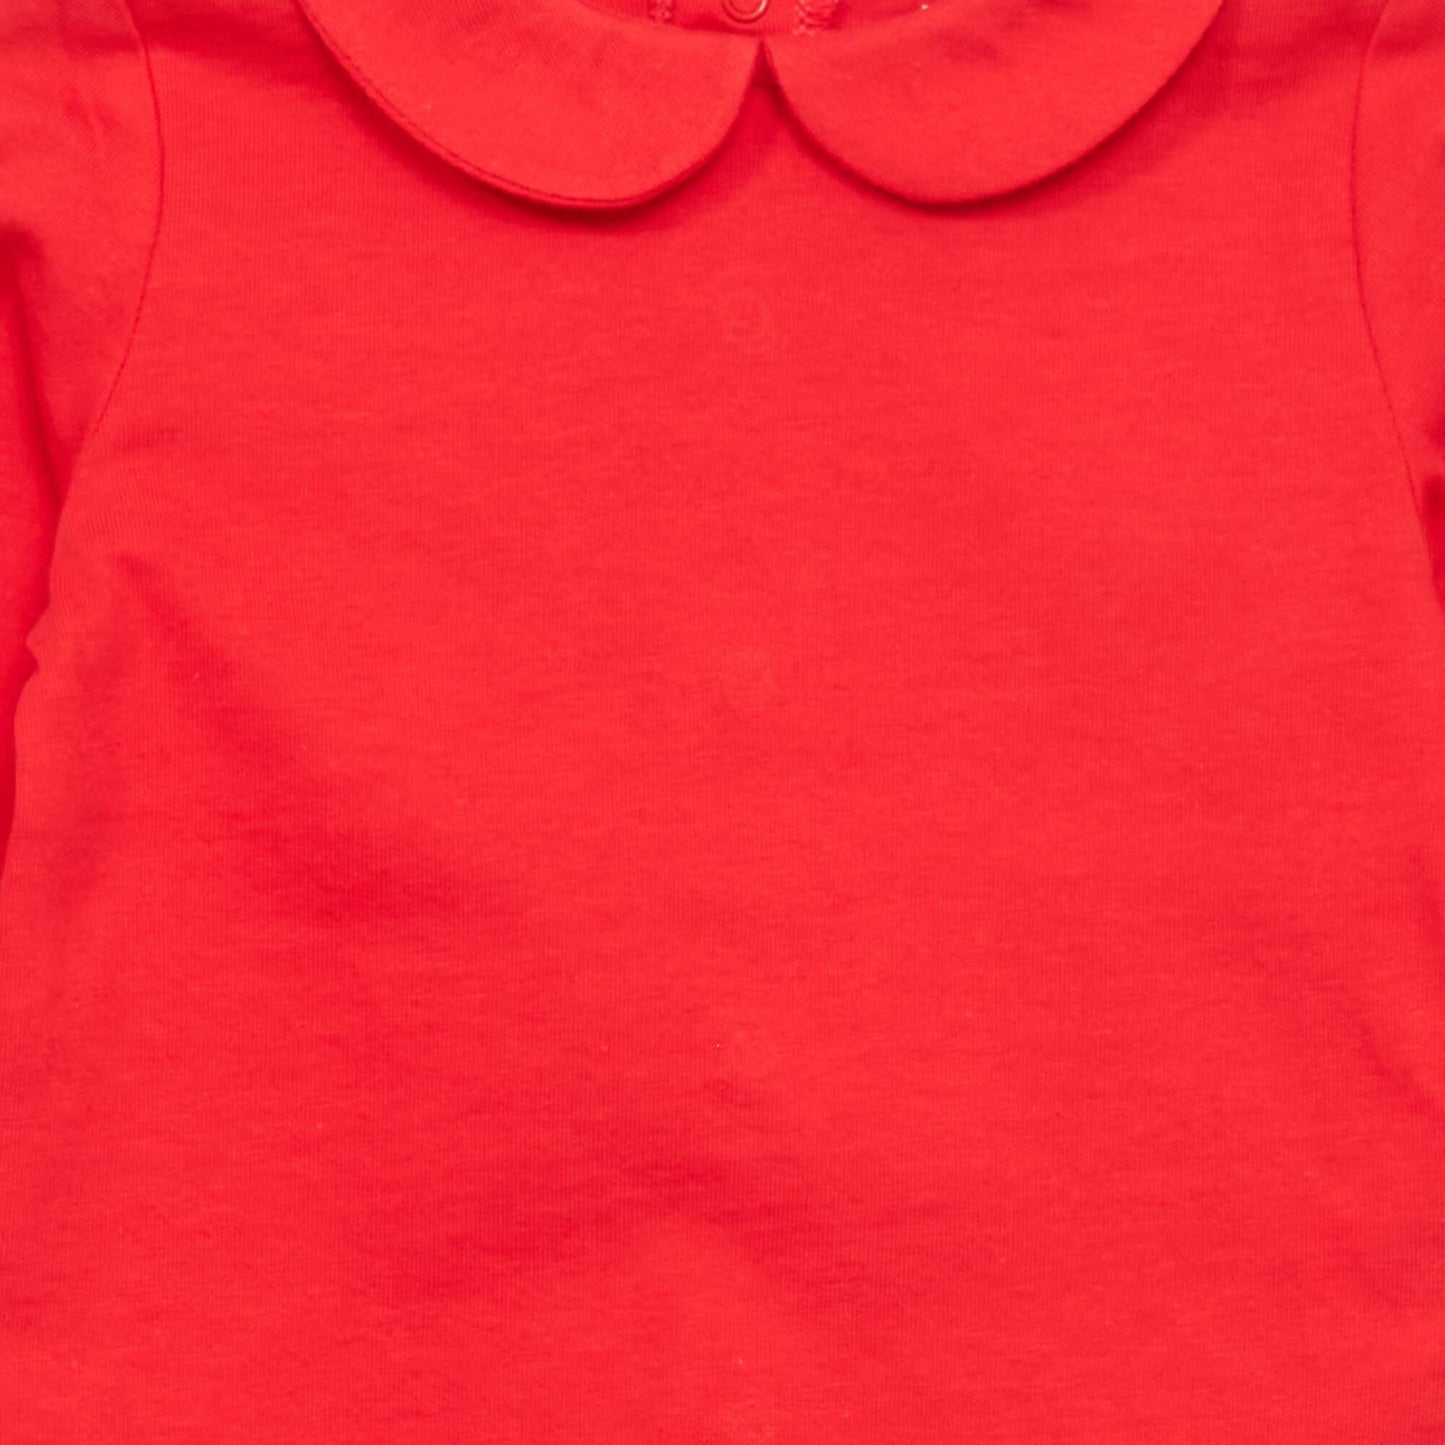 T-shirt with Peter Pan collar bright red